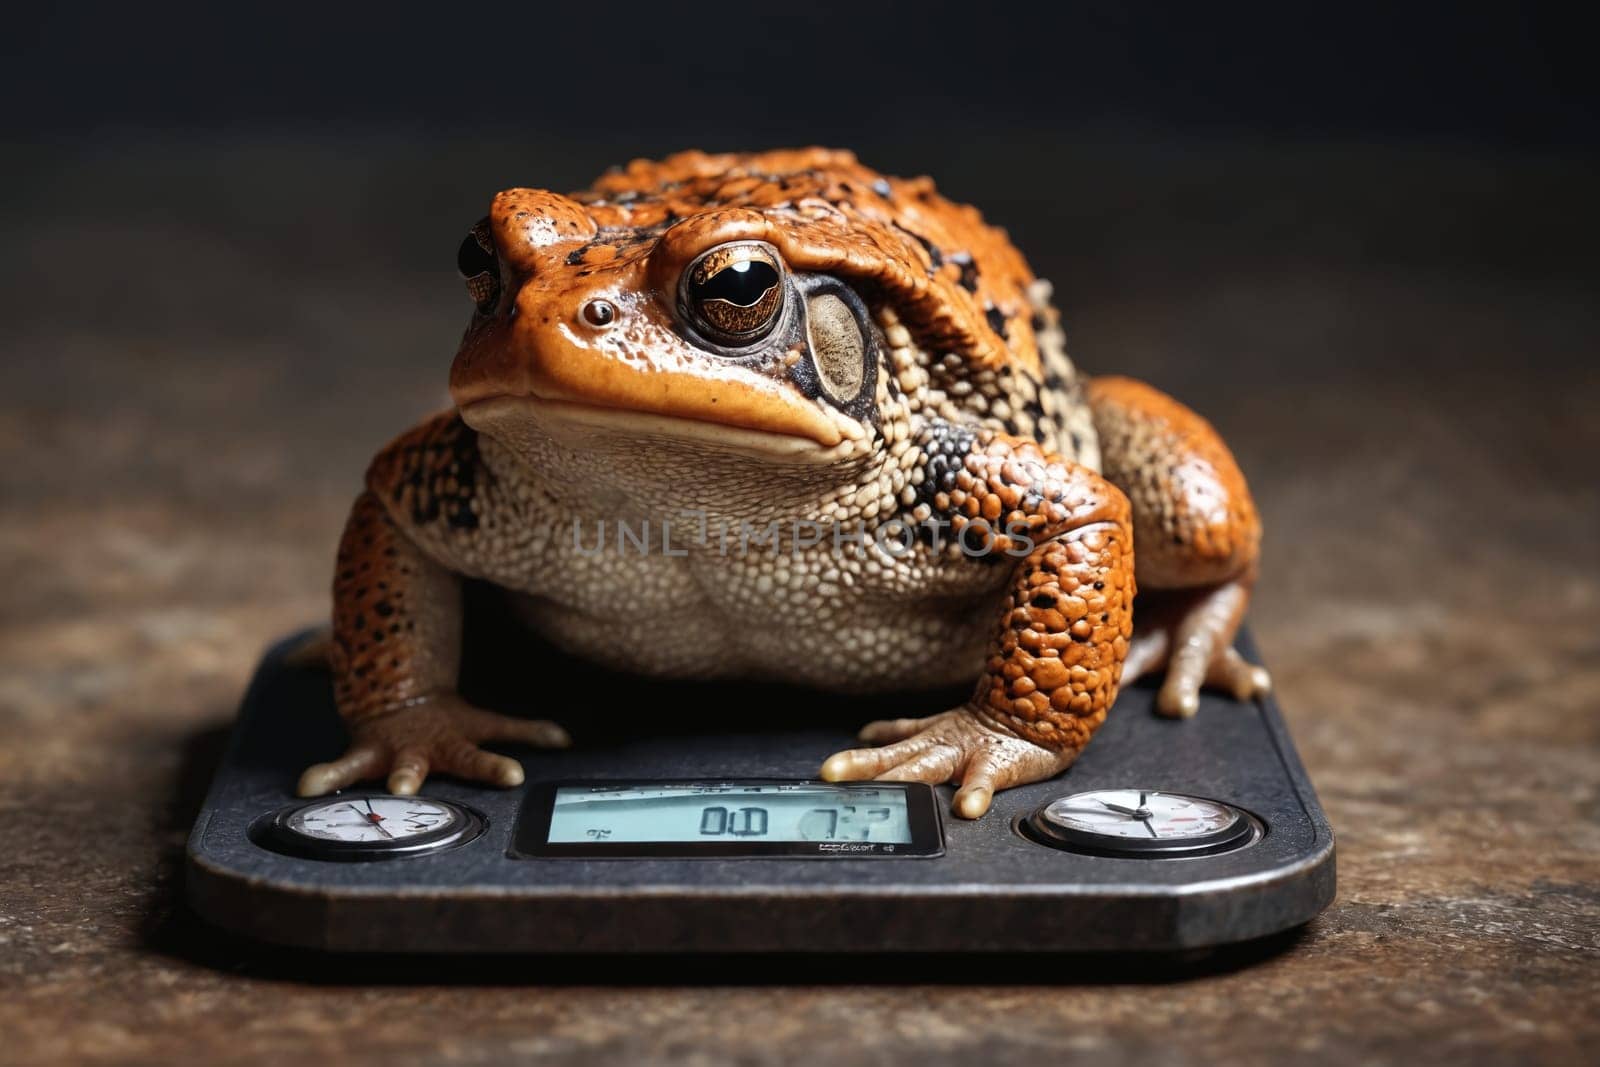 This playful moment captures a green frog's unexpected visit to a metallic weighing scale.